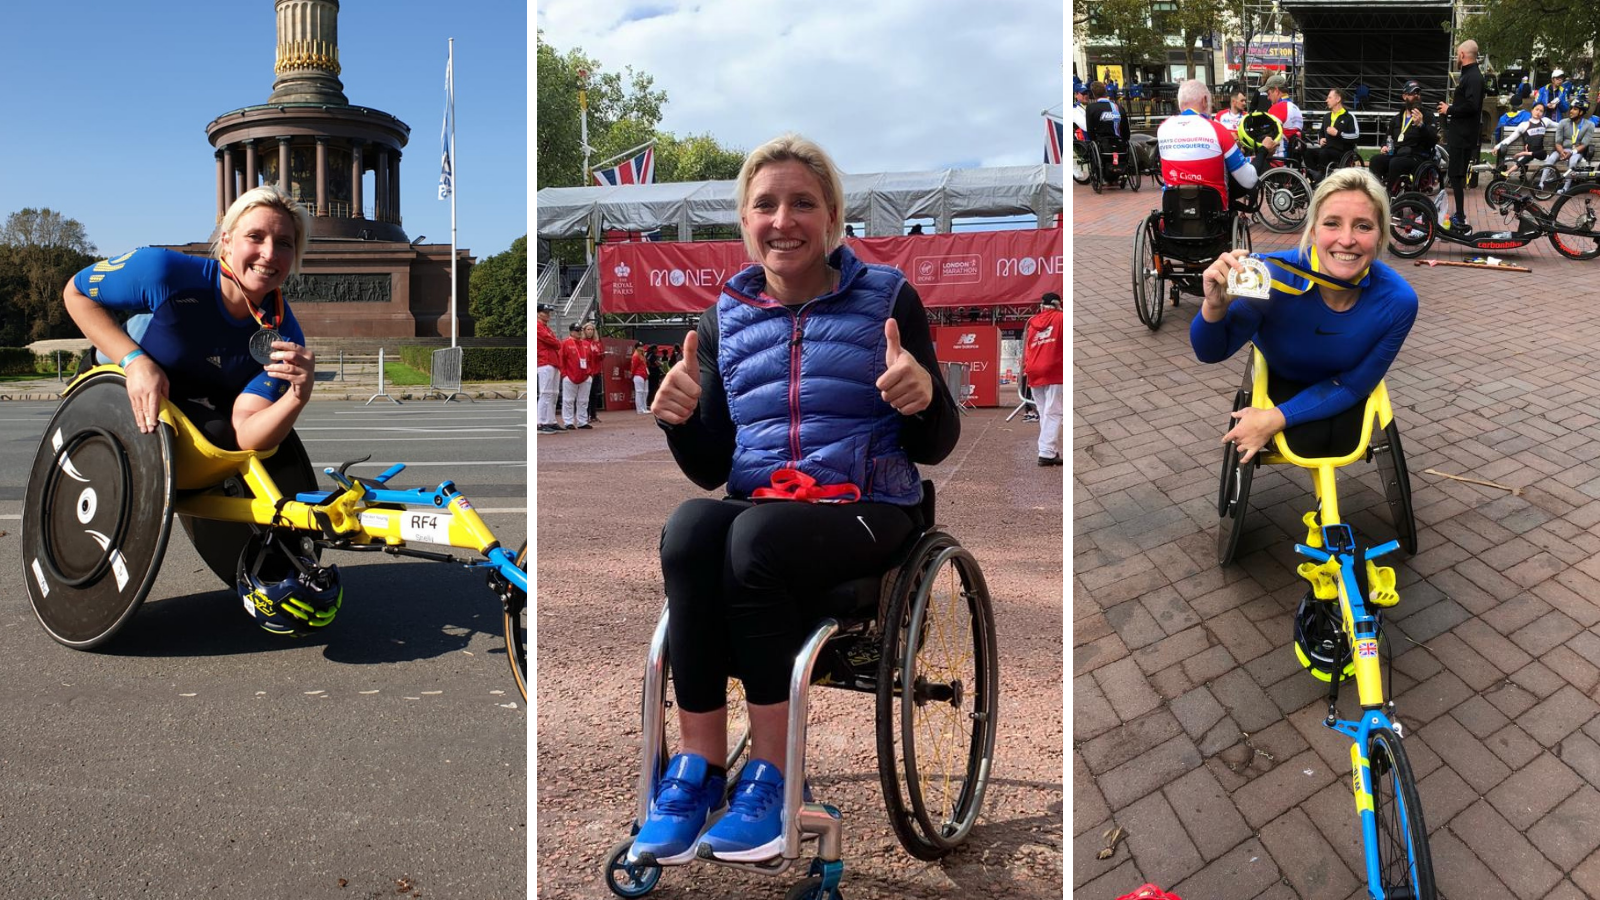 Congratulations to wheelchair racer Shelly Woods for completing three marathons in three weeks